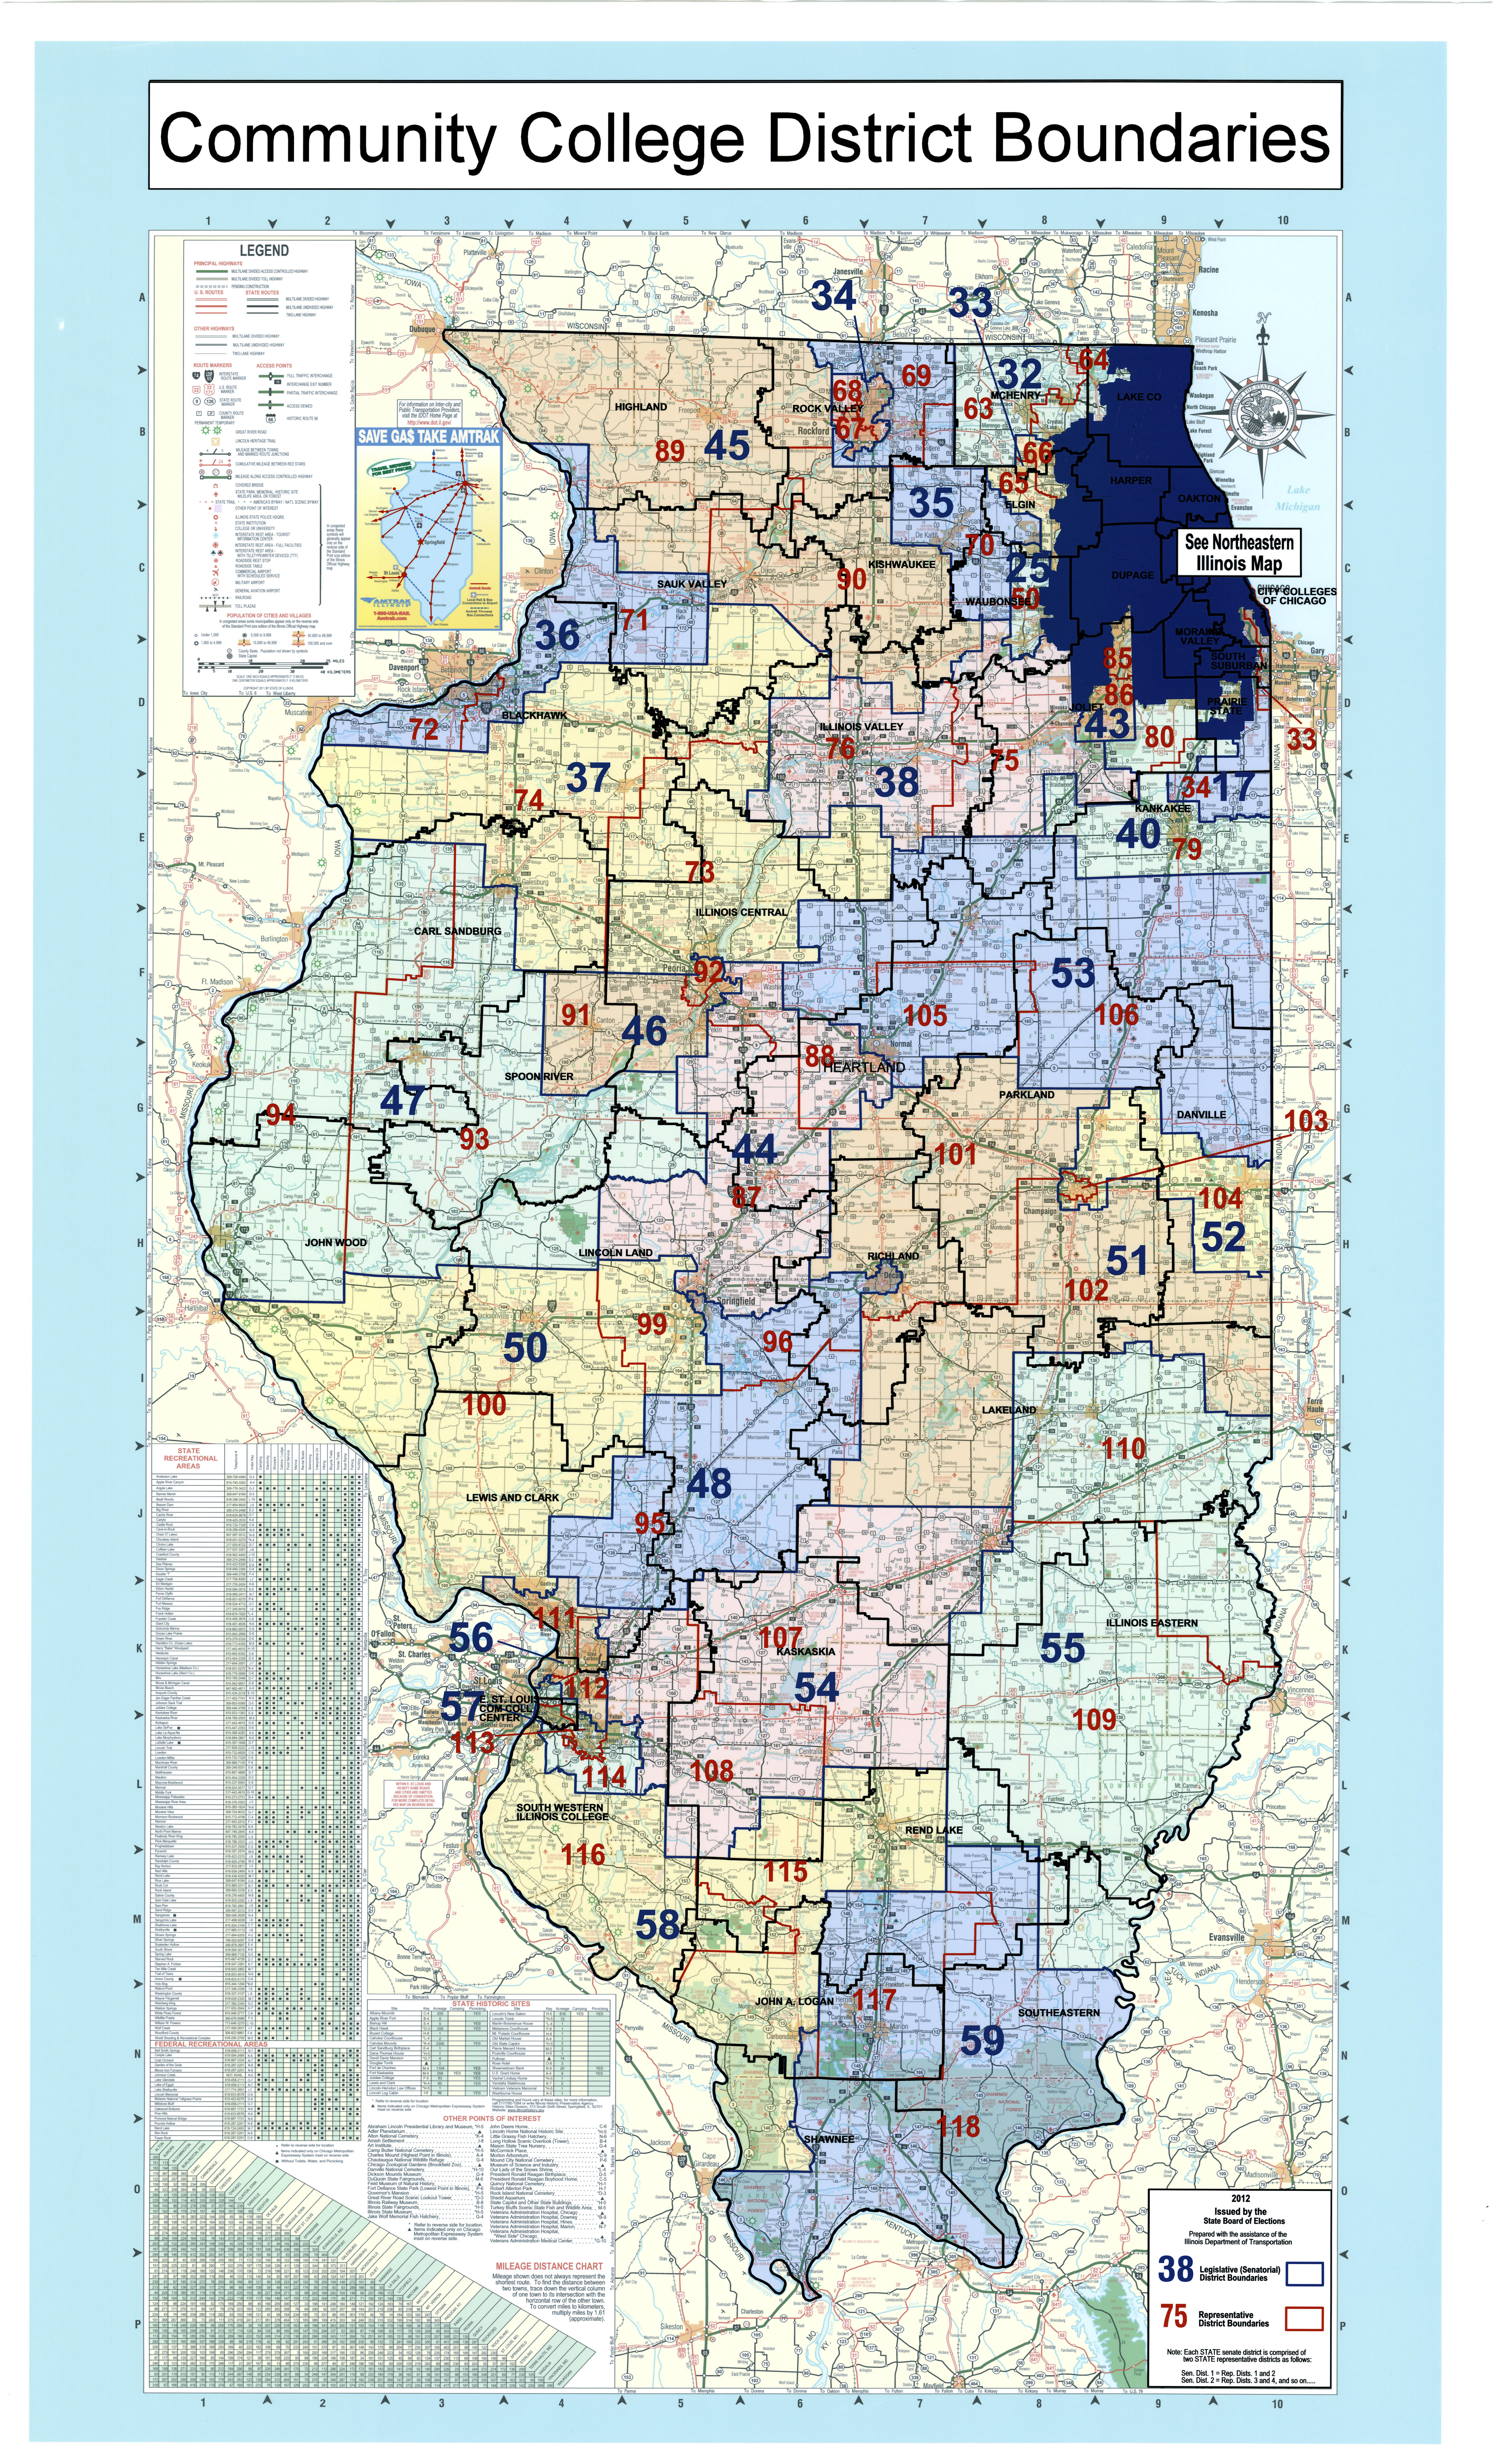 Illinois Community Colleges with Legislative District Boundaries (Statewide)